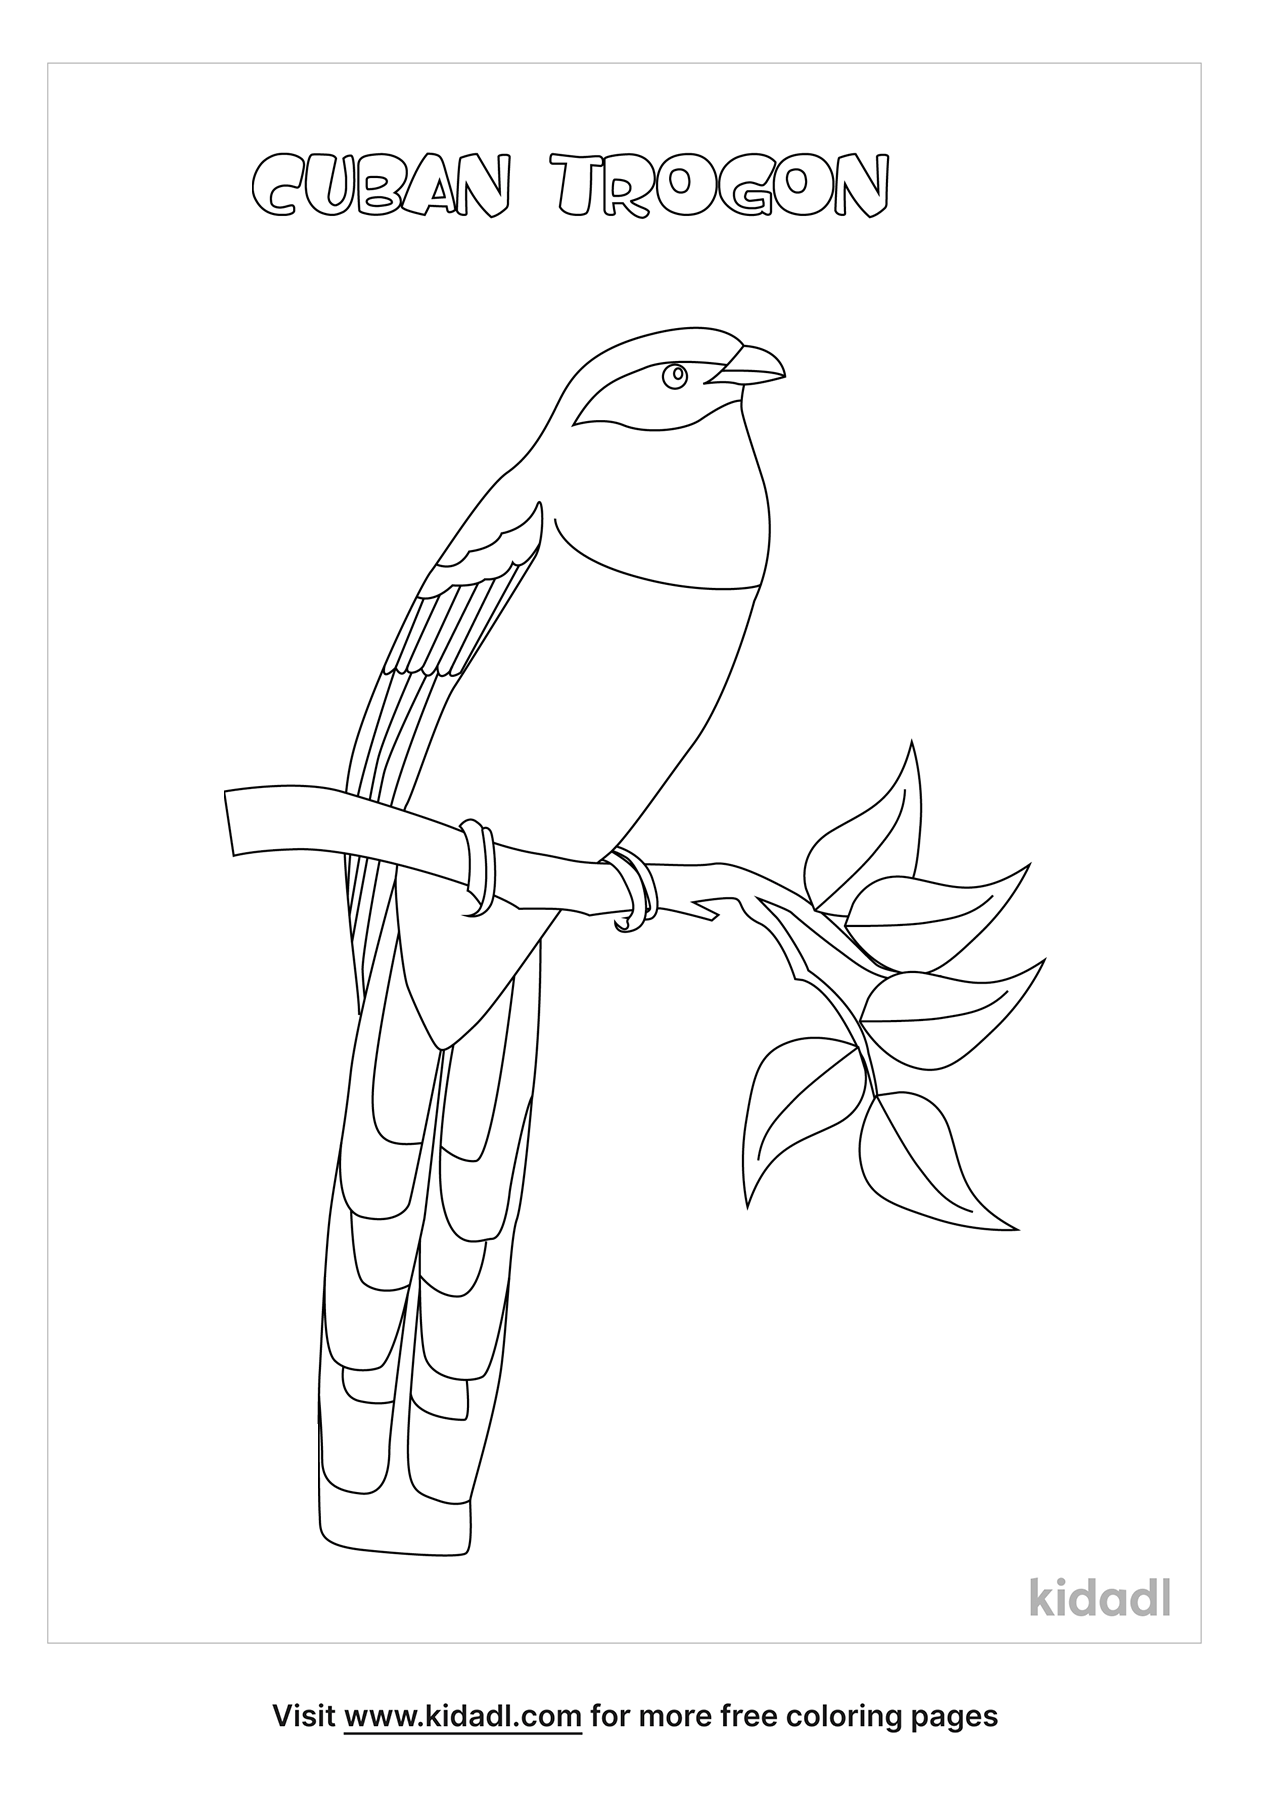 Cuban Trogon Coloring Pages | Free Birds Coloring Pages | Kidadl